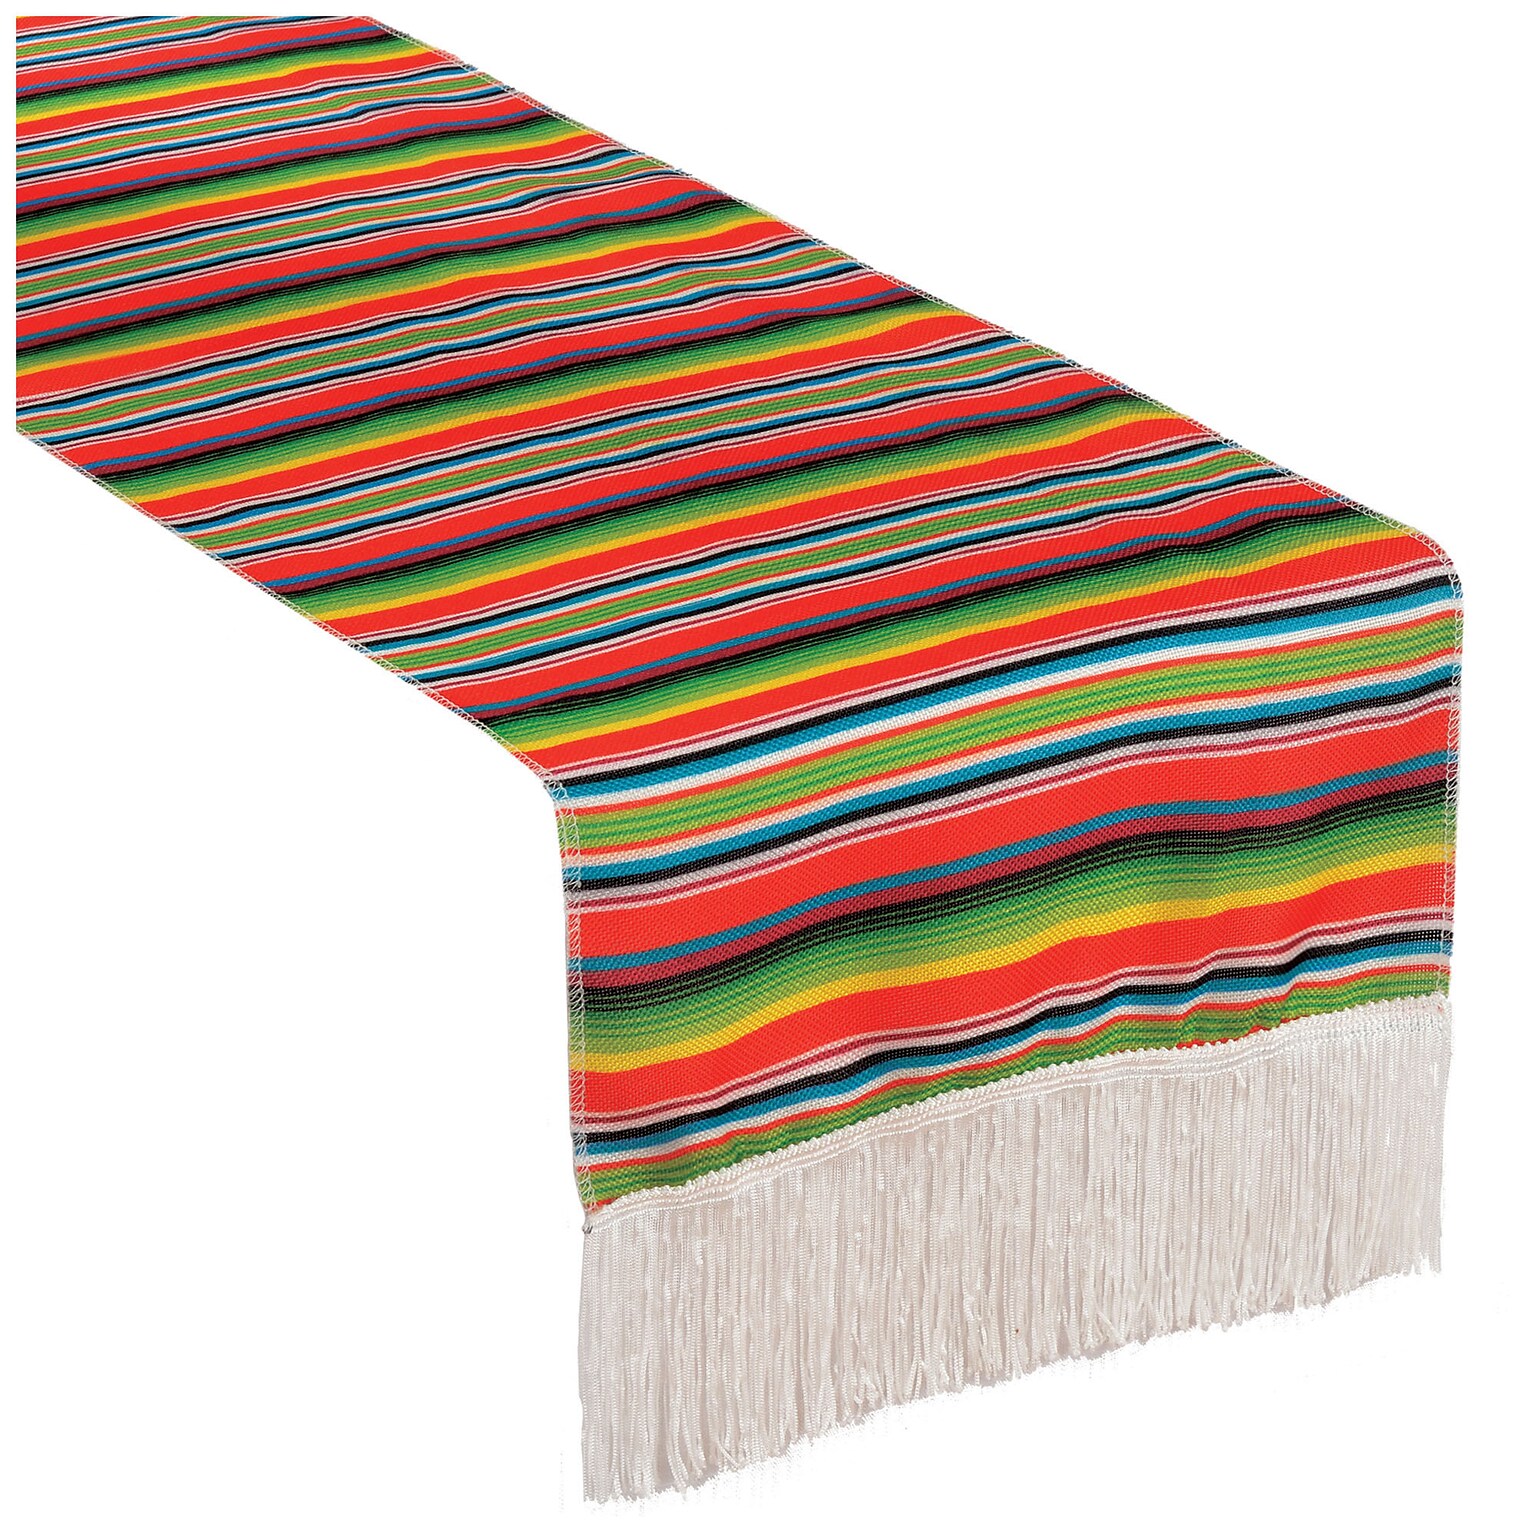 Amscan Fiesta Serape Striped Reusable Table Runner, 72L x 14W, Multi Color, Polyester, Pack of 2 (570023)